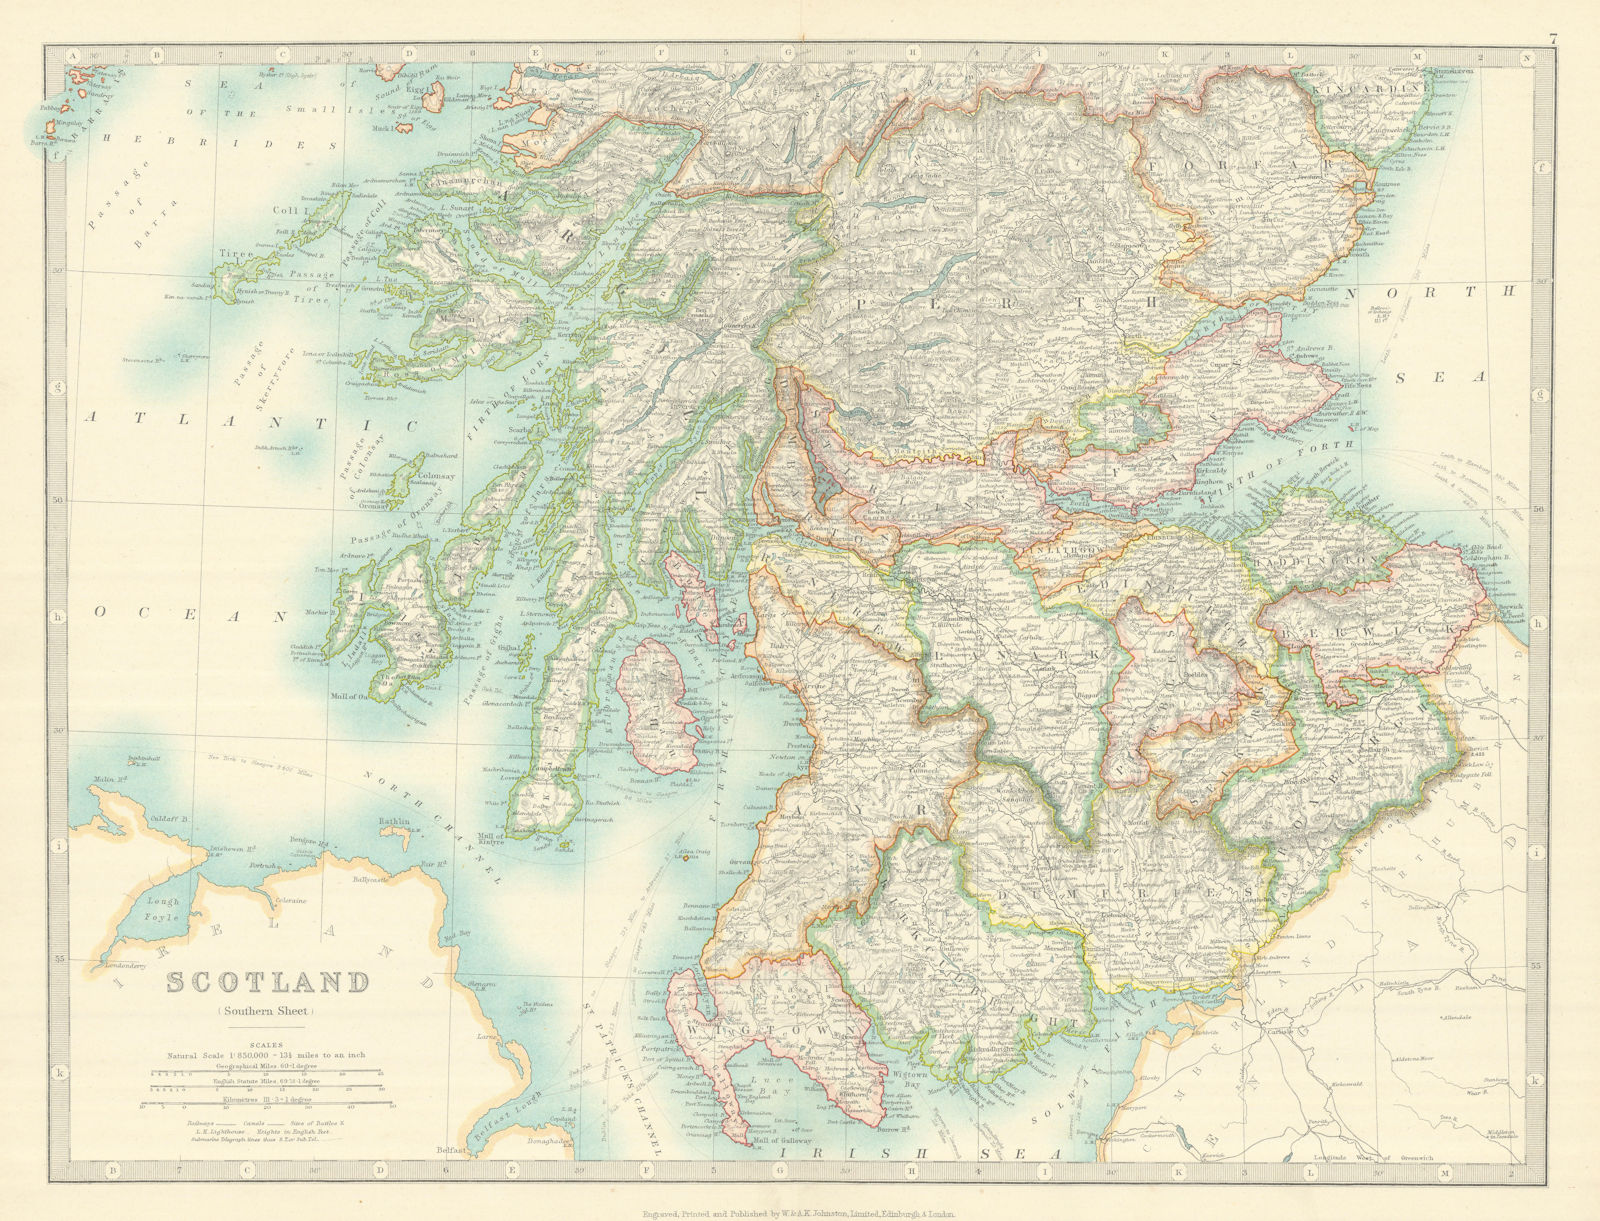 SOUTHERN SCOTLAND showing battlefields and dates. JOHNSTON 1913 old map